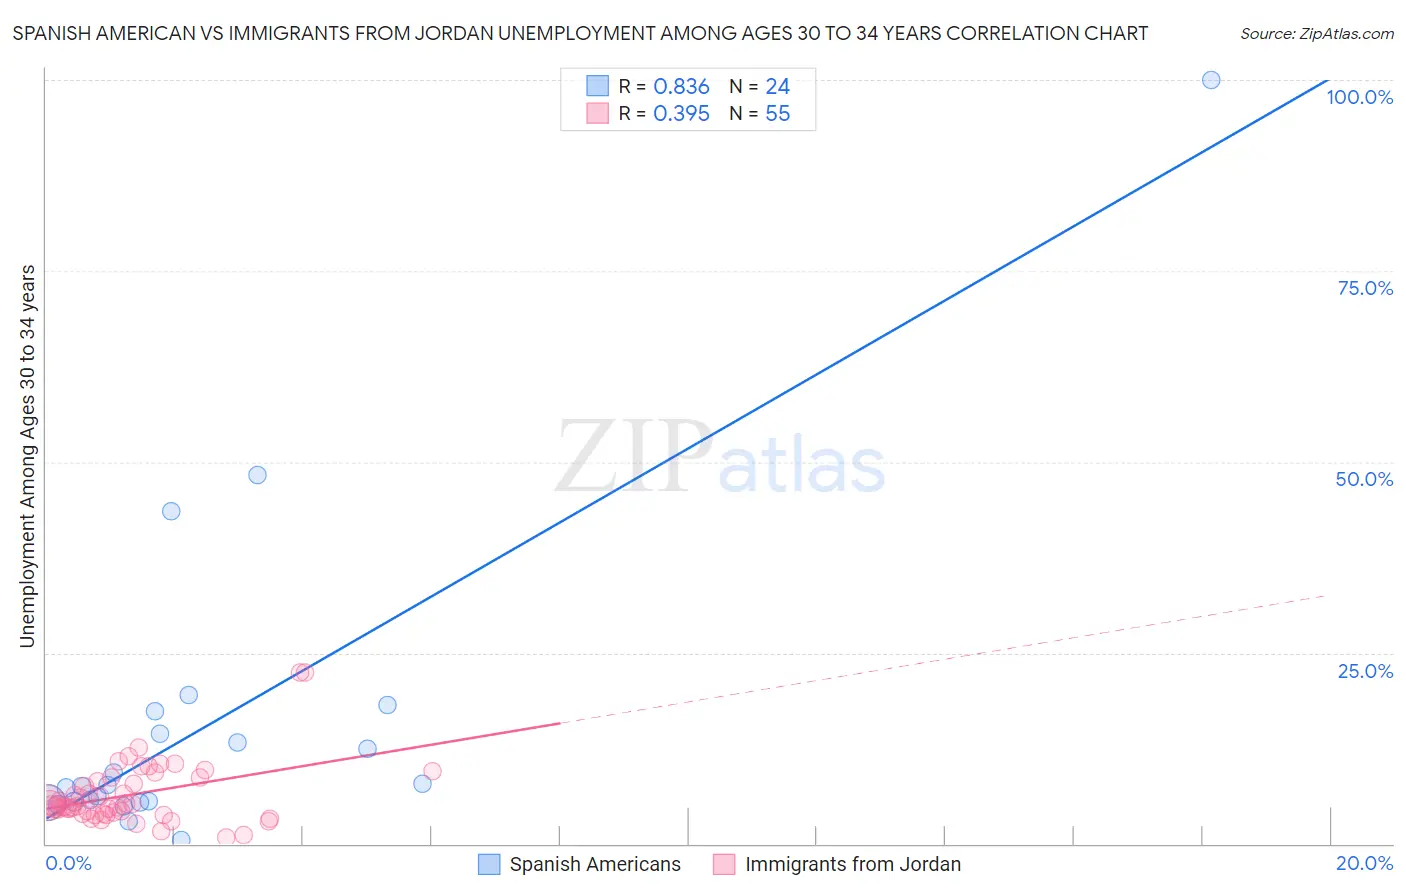 Spanish American vs Immigrants from Jordan Unemployment Among Ages 30 to 34 years